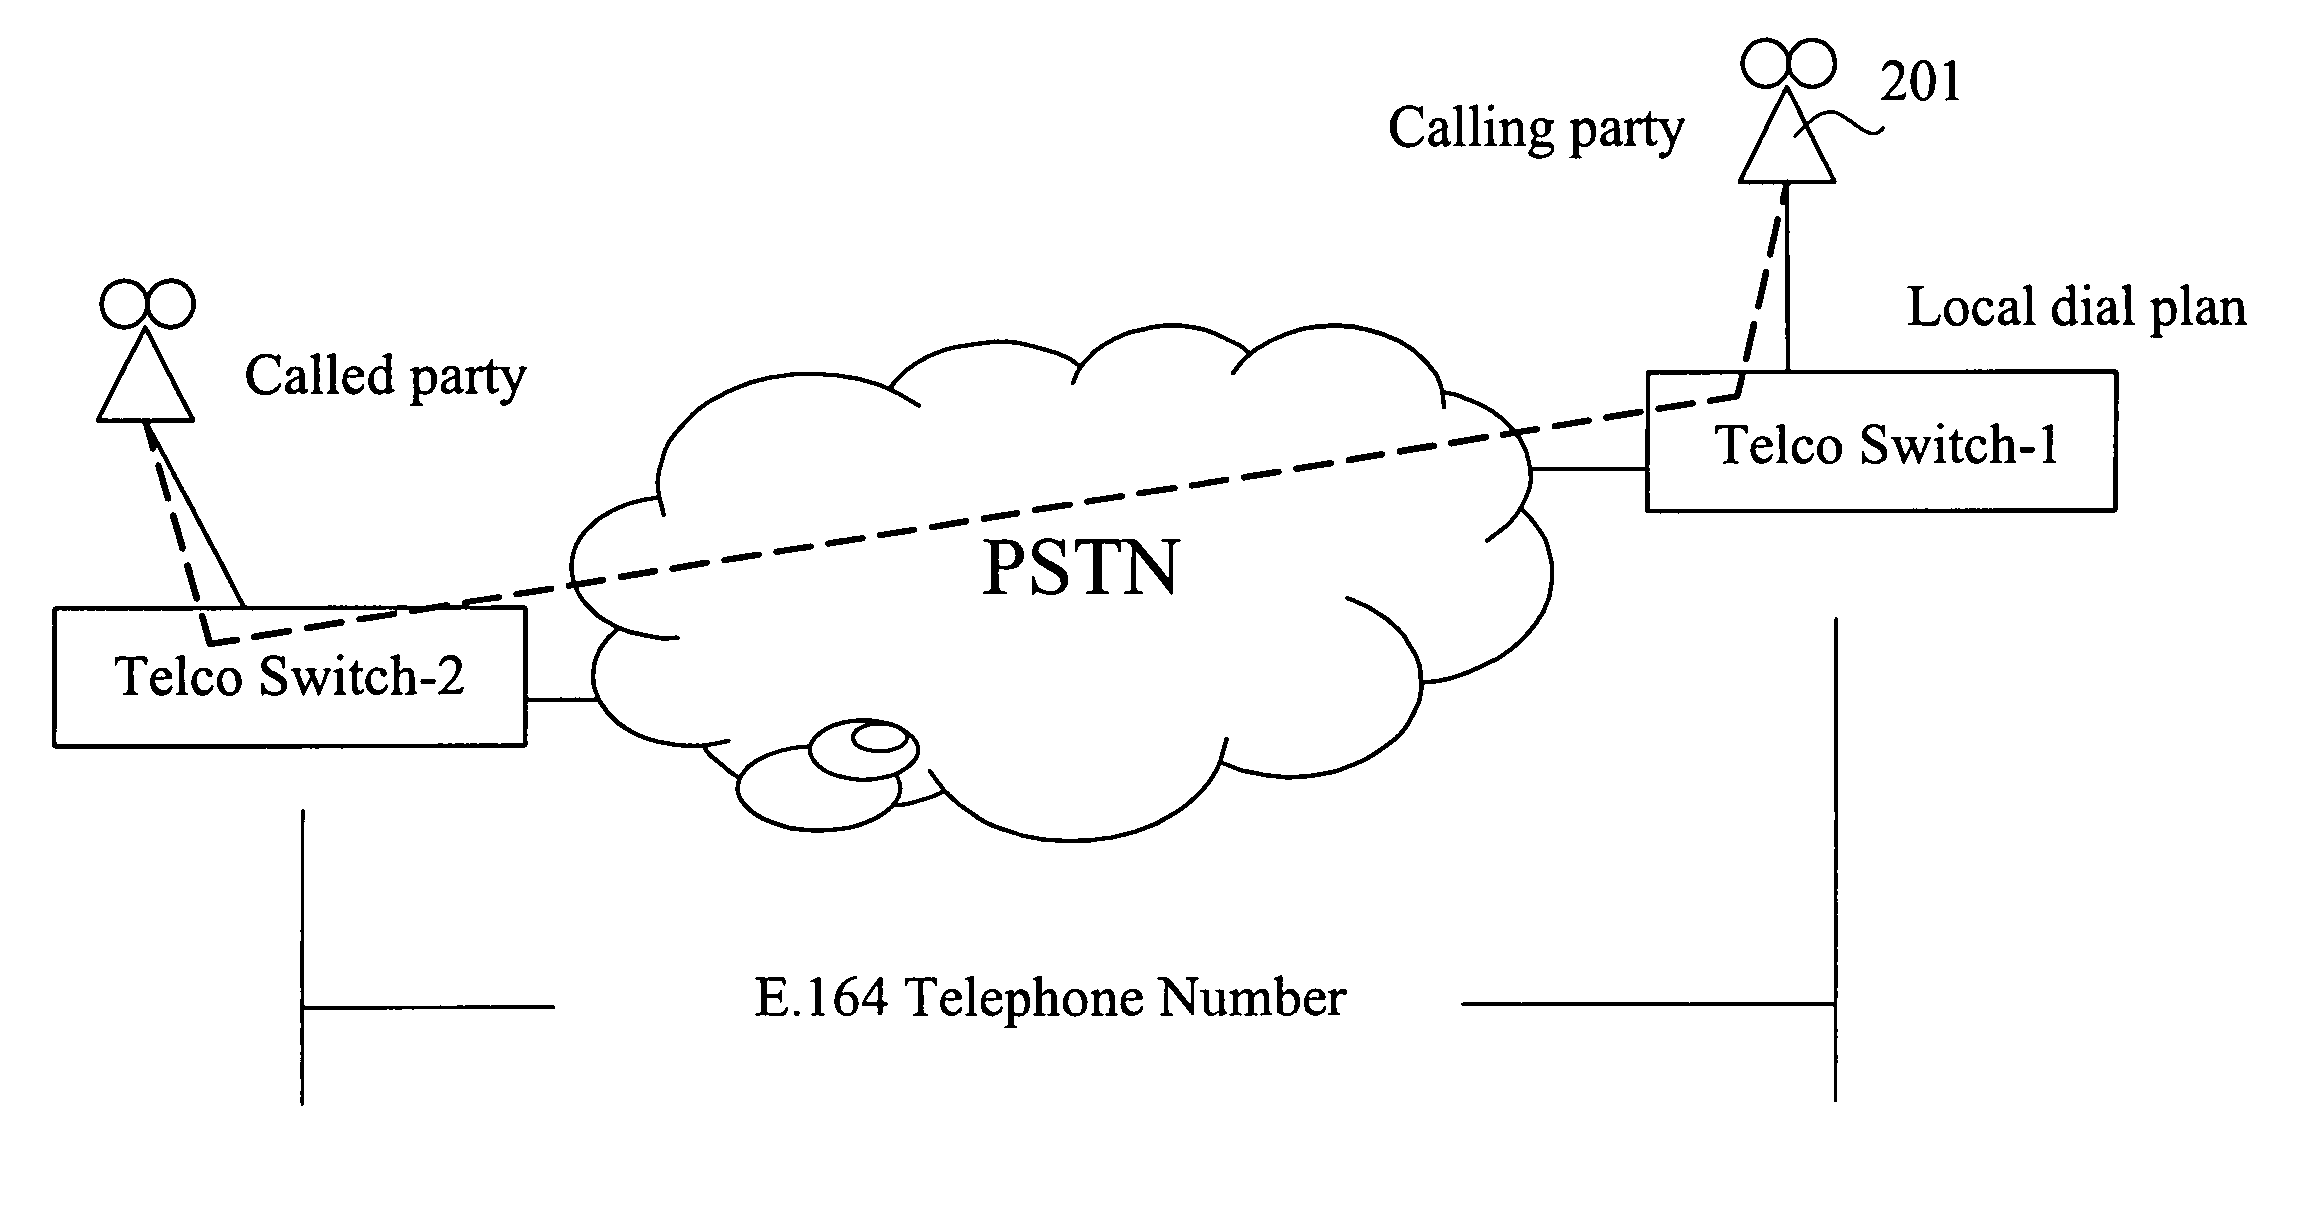 Communication method for placing phone calls by using a fixed dial plan